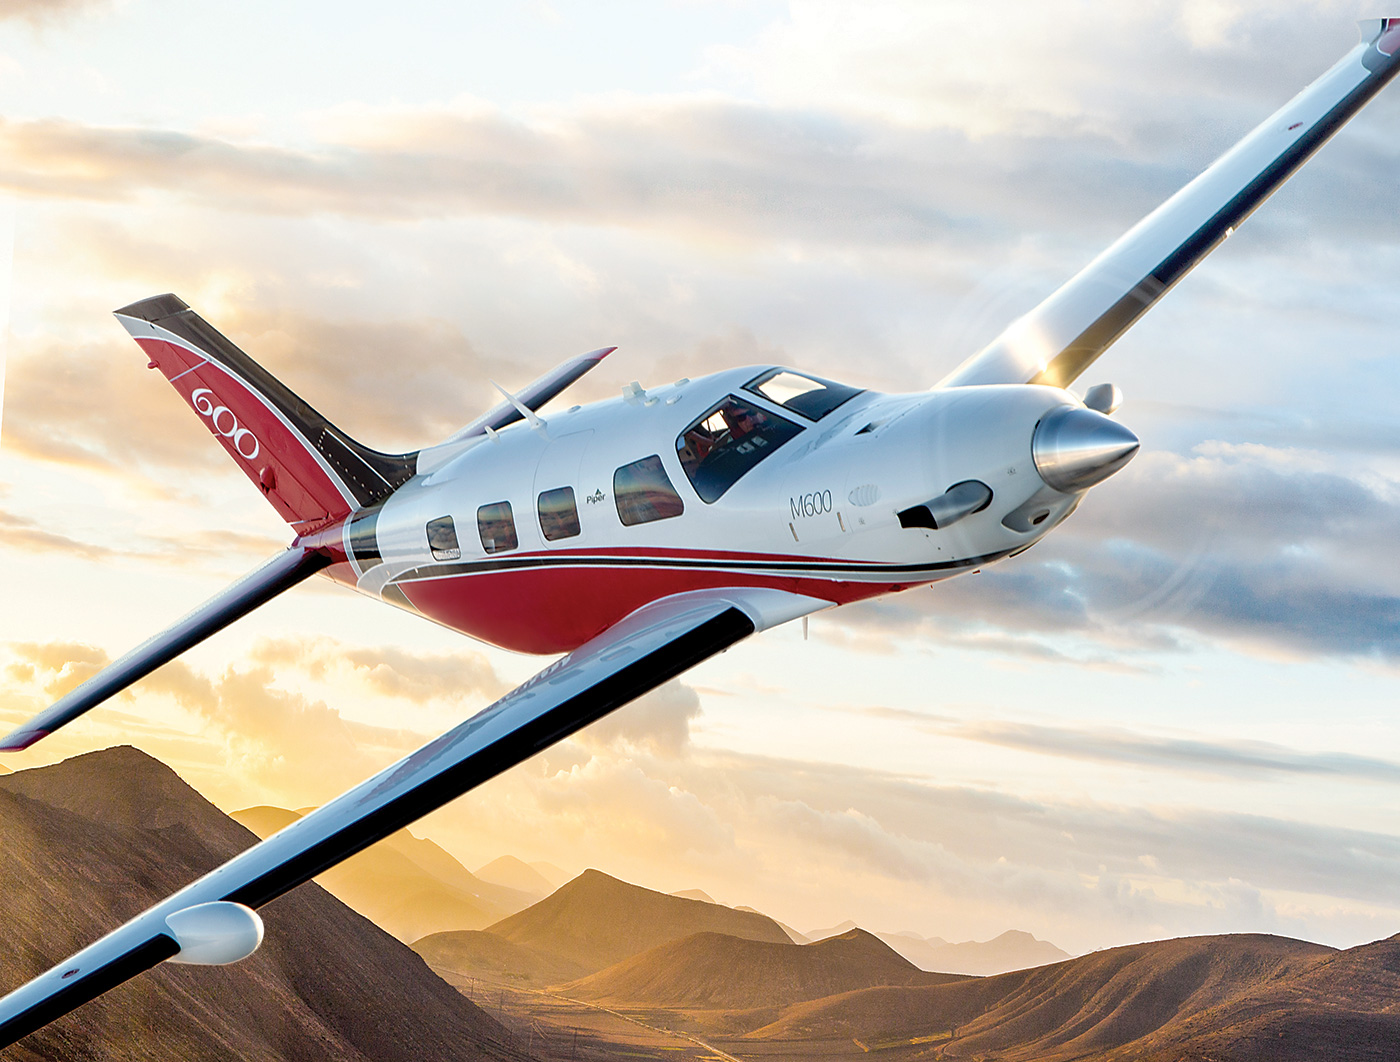 The Piper M600 is now £3million to buy new